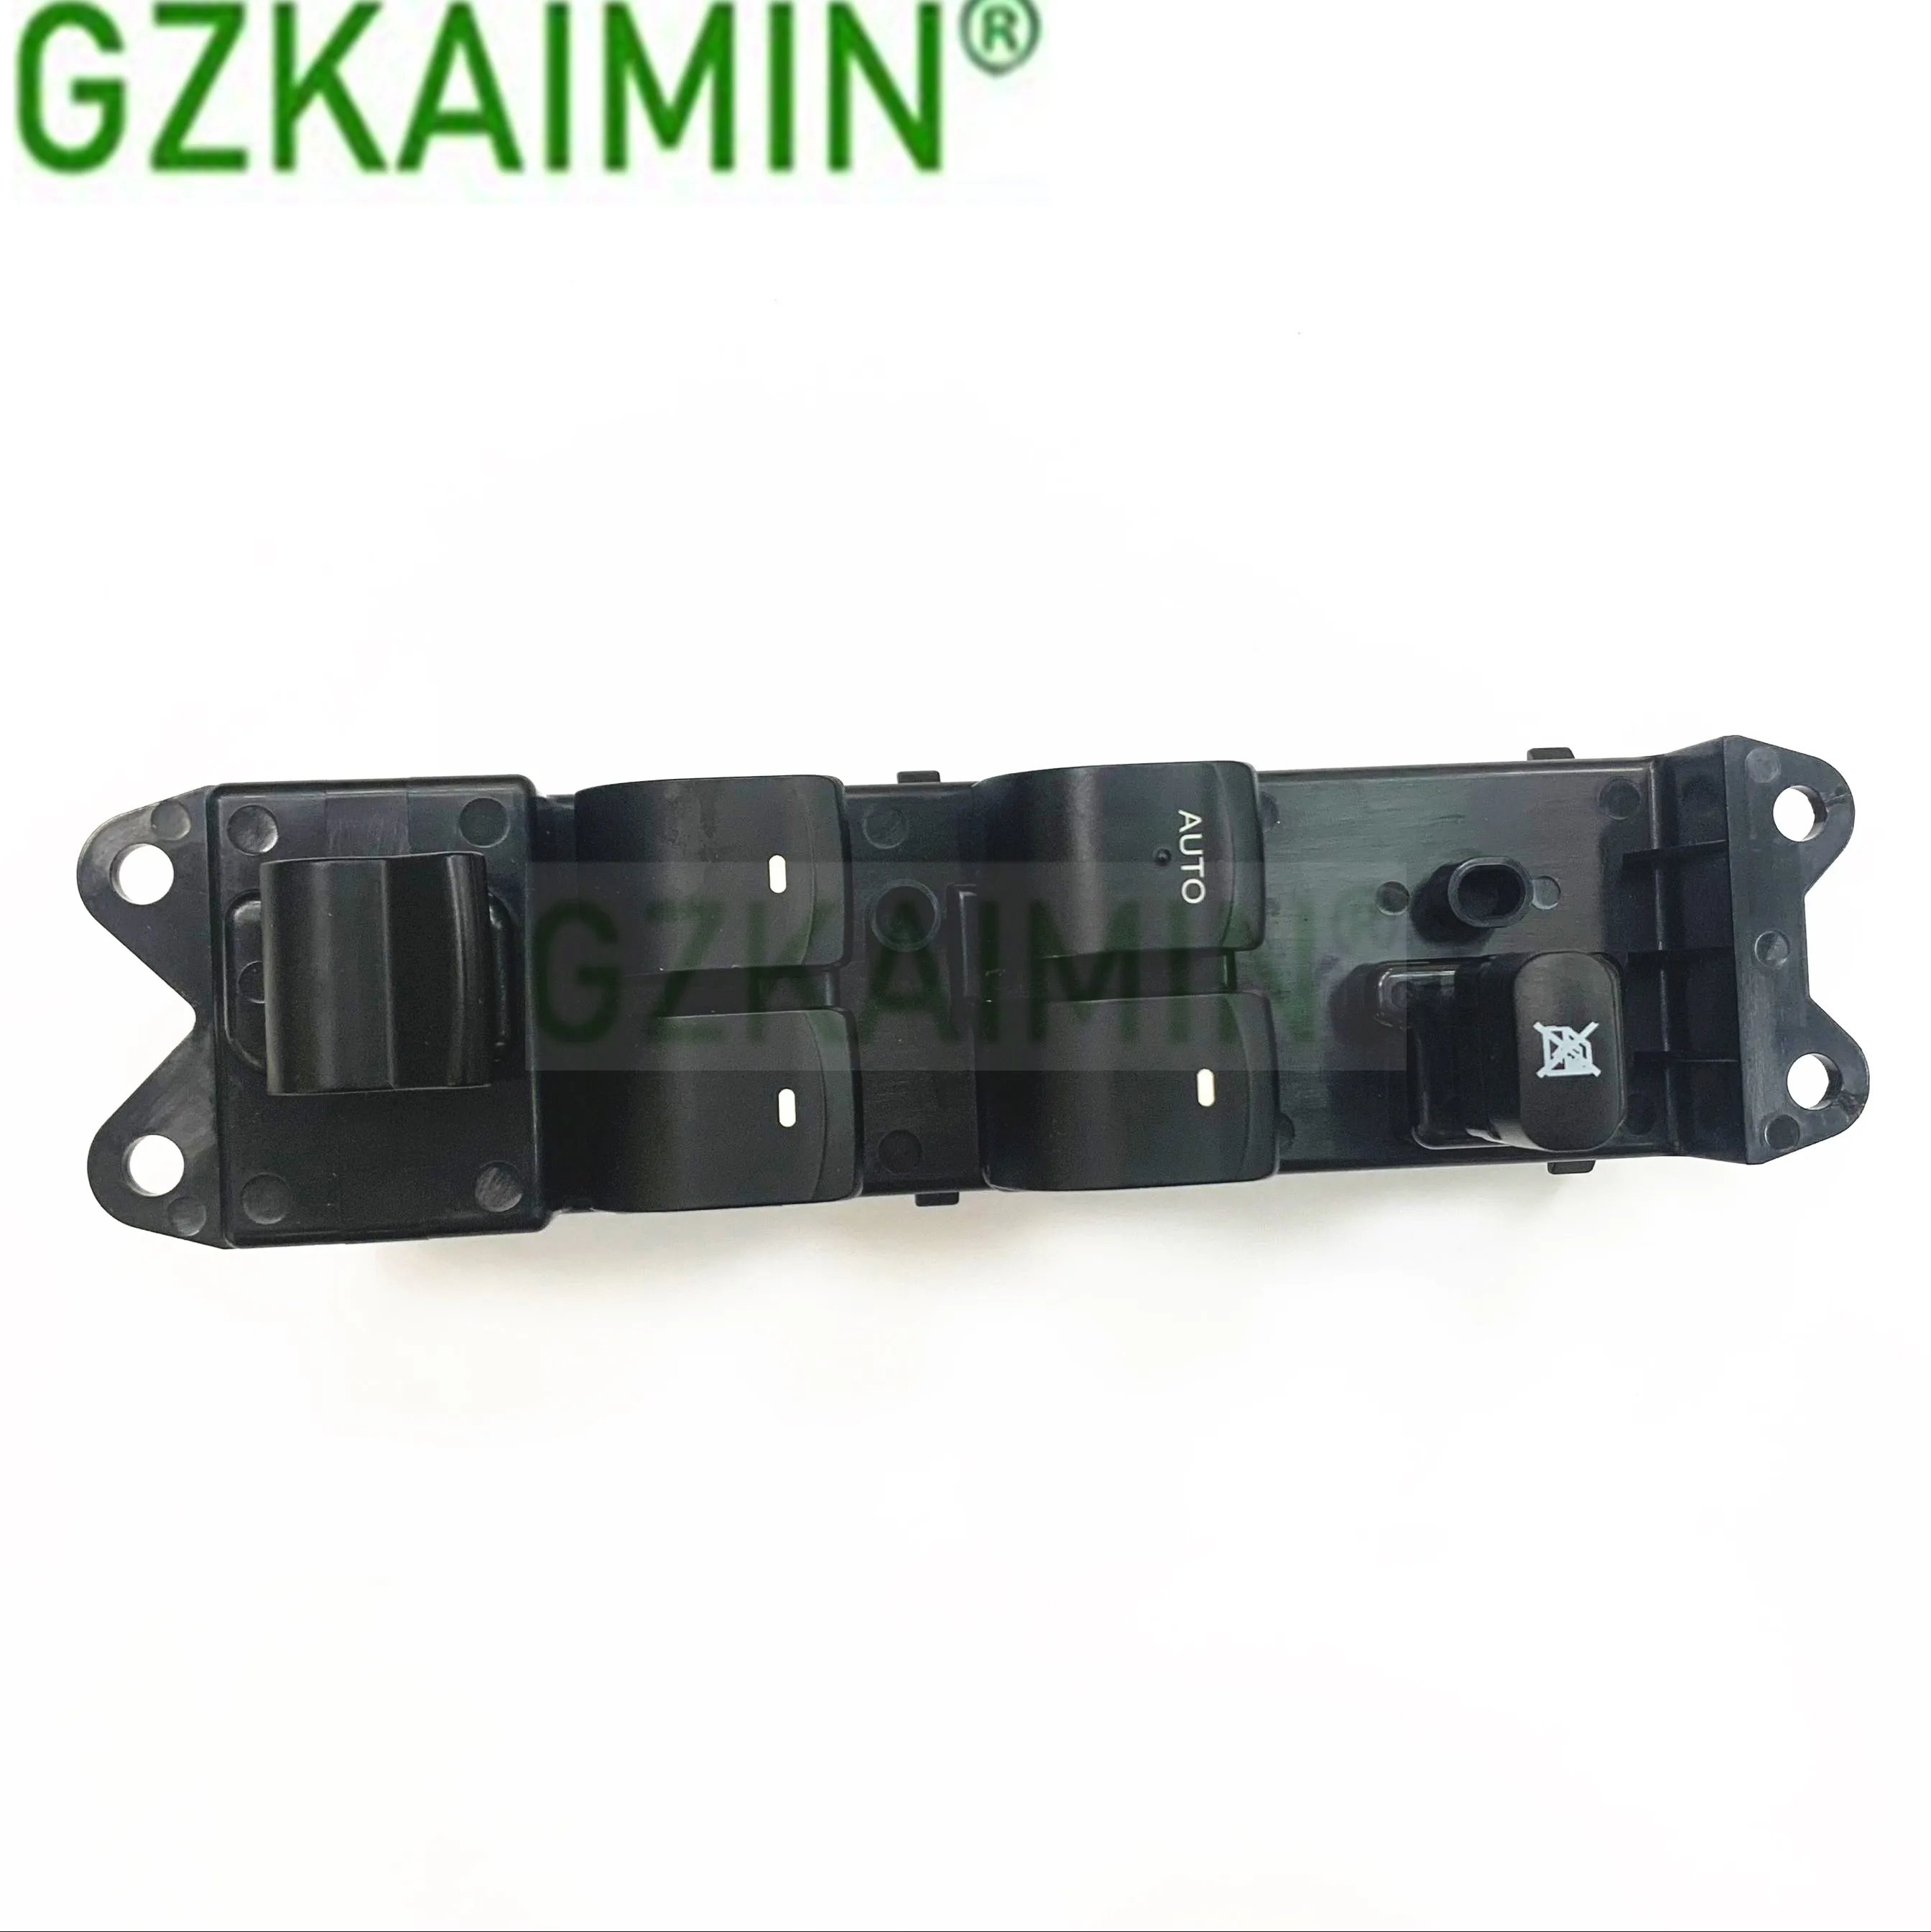 

OEM 83071-AG05A 83071-AG05B FOR 05-09 SUBARU LEGACY OUTBACK DRIVER SIDE MASTER POWER WINDOW CONTROL SWITCH